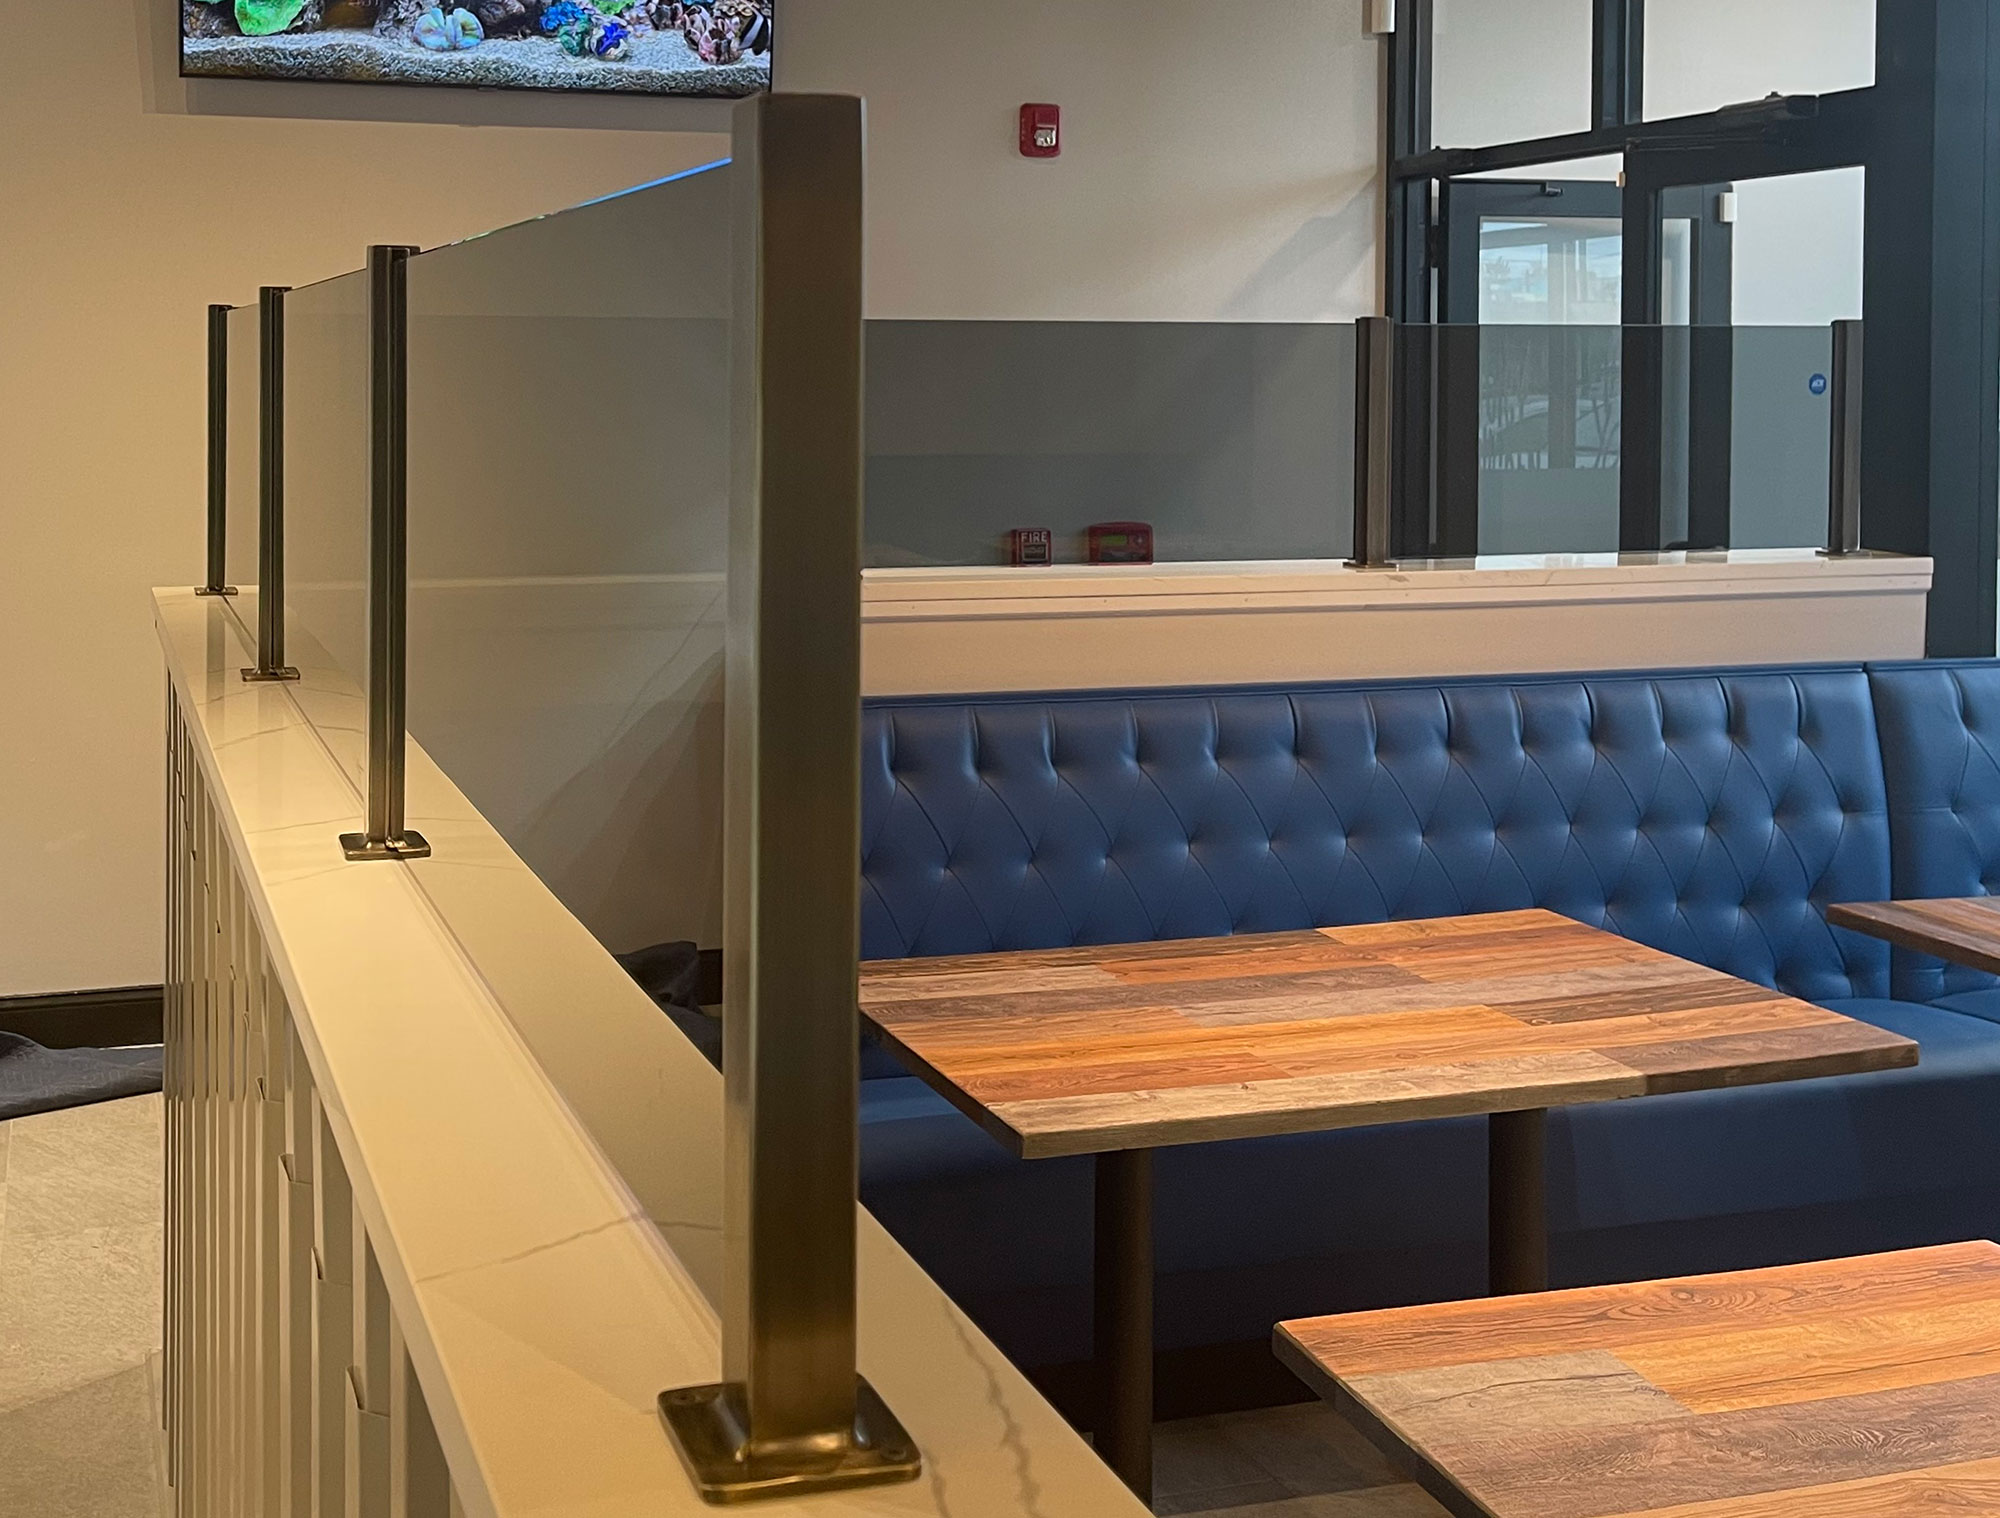 Satin stainless steel partitions | Mike’s Pizza Kitchen - Parlin, NJ